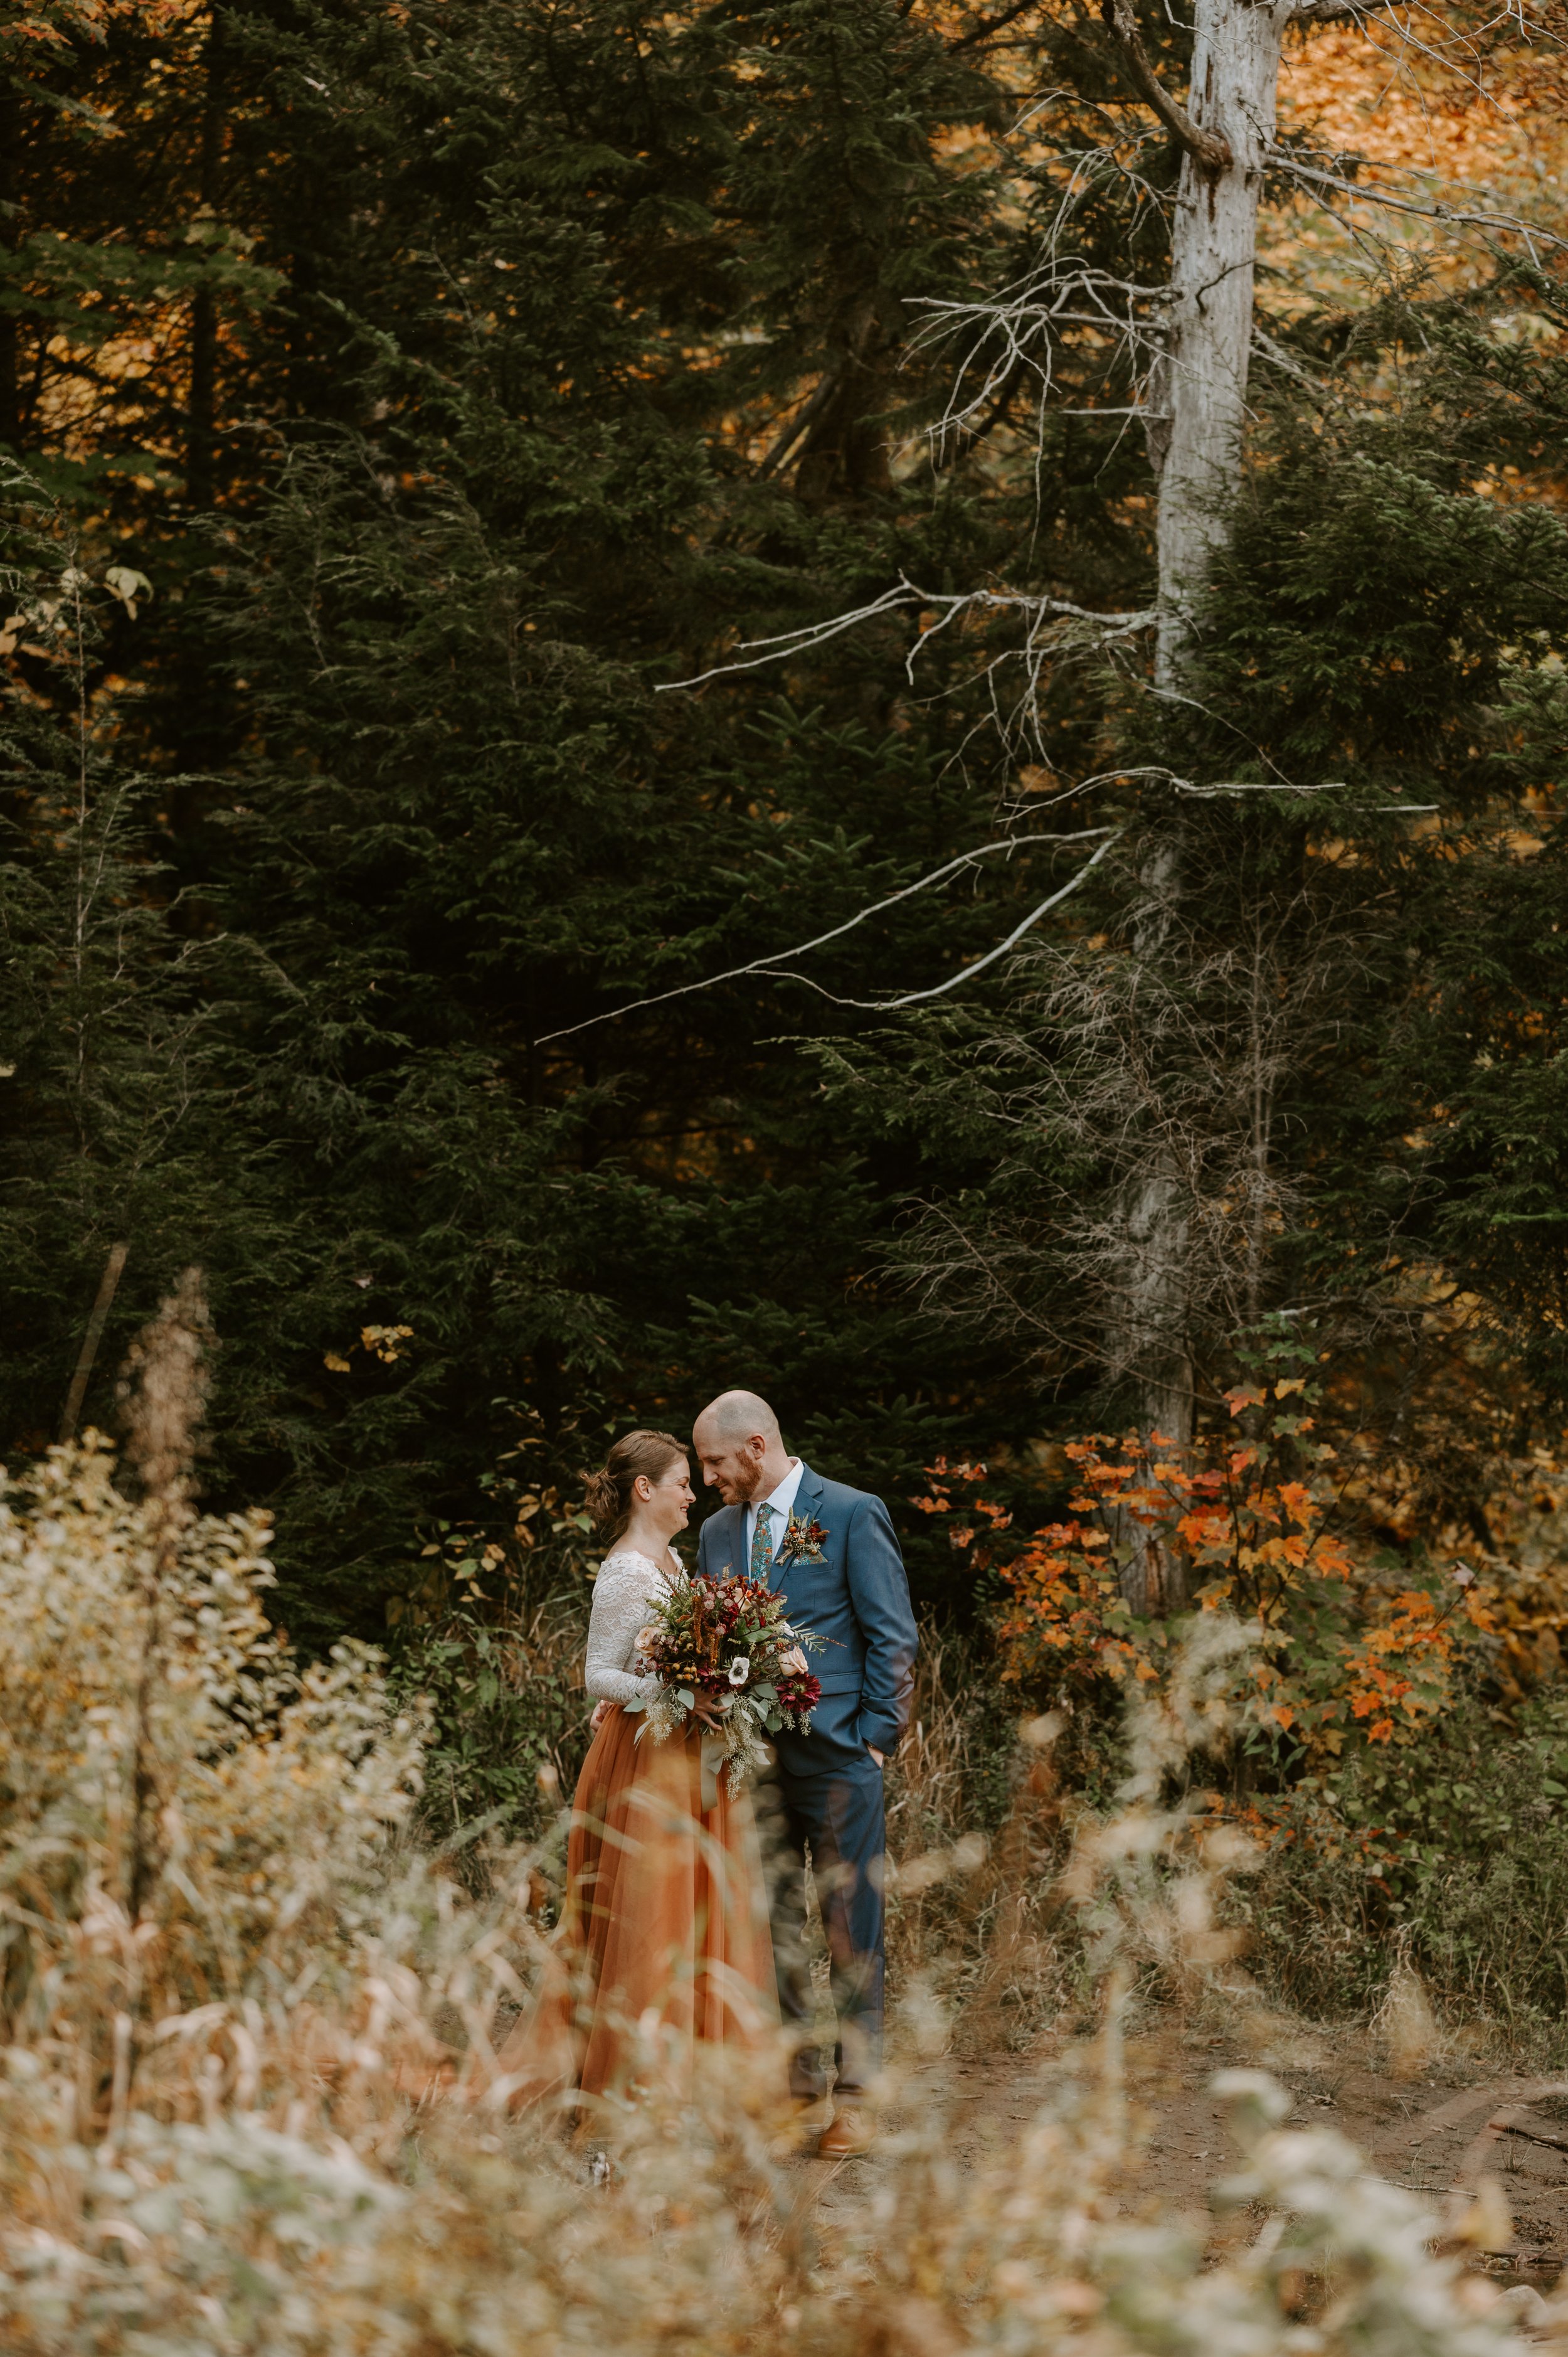 Stowe Vermont wedding and elopement photographer. Stowe Vermont wedding photographer. Trapp family lodge wedding photographer. Edson Hill wedding photographer. Topnotch wedding photographer. The Woodstock Inn wedding photographer 